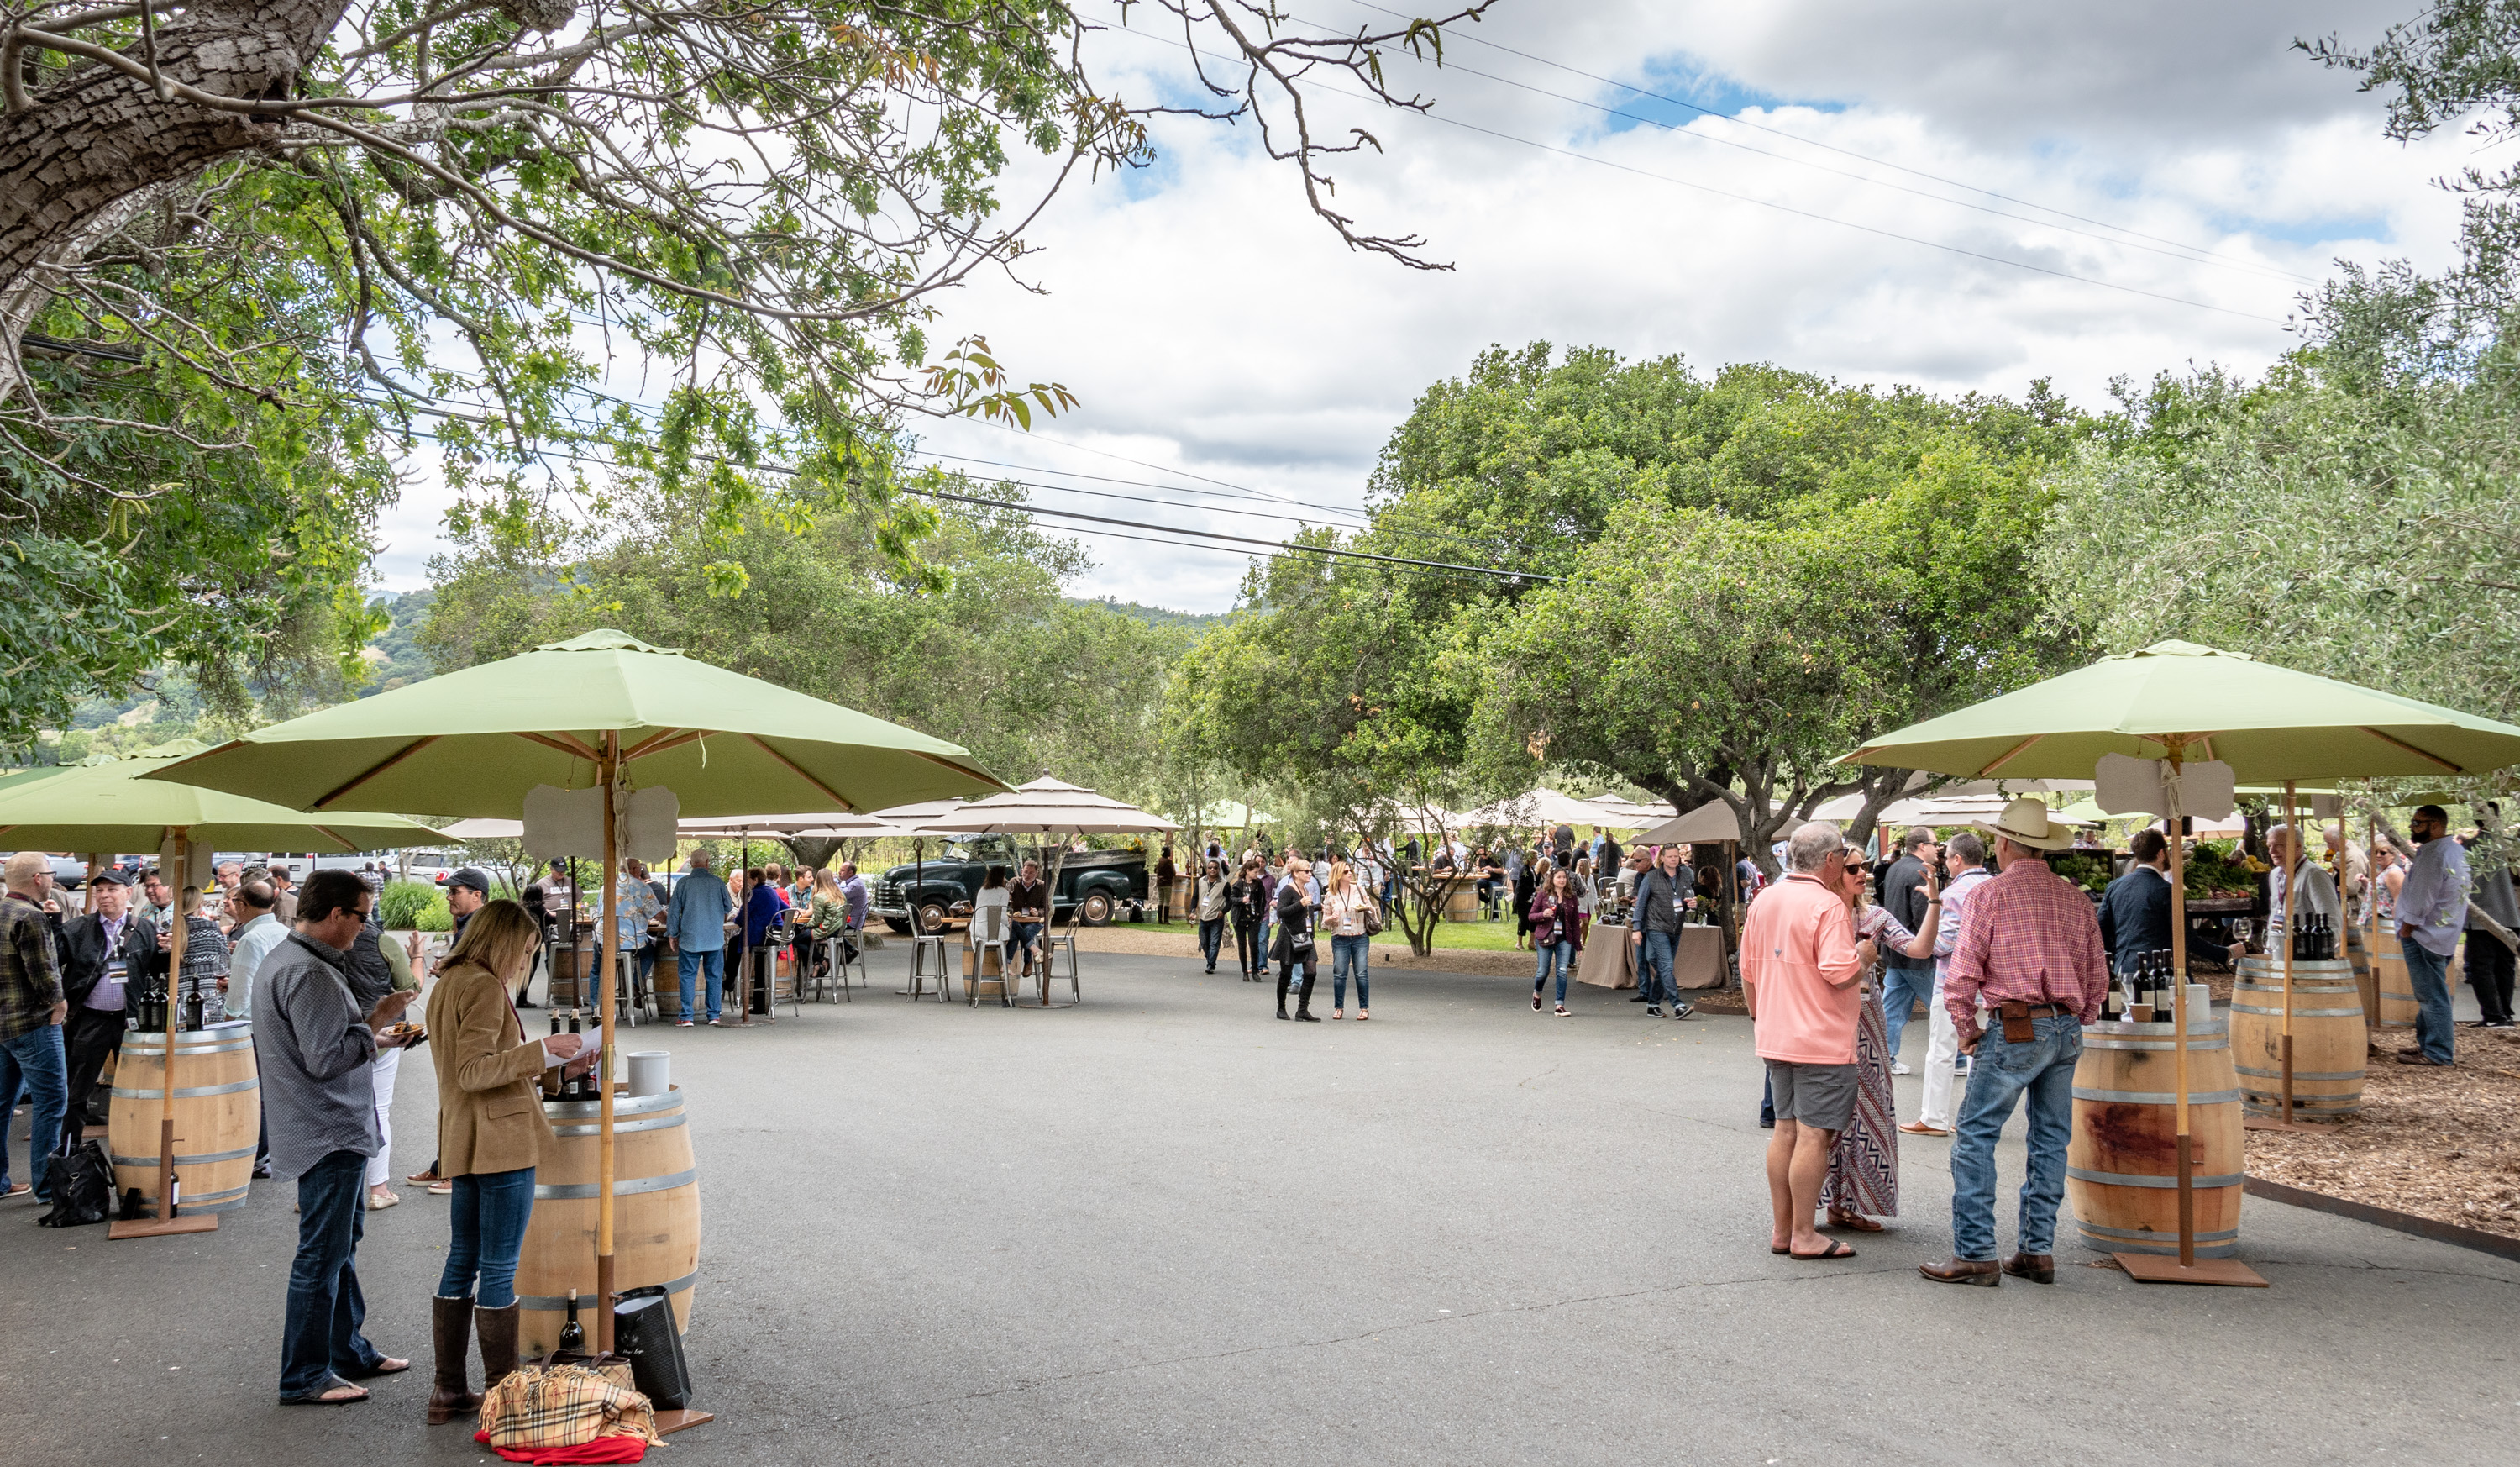 The Grand Vintner-Hosted Lunch and Tasting will be hosted at Regusci Winery and a gourmet lunch will be prepared by award-winning Chef Stephen Barber of Farmstead Restaurant at Long Meadow Ranch.